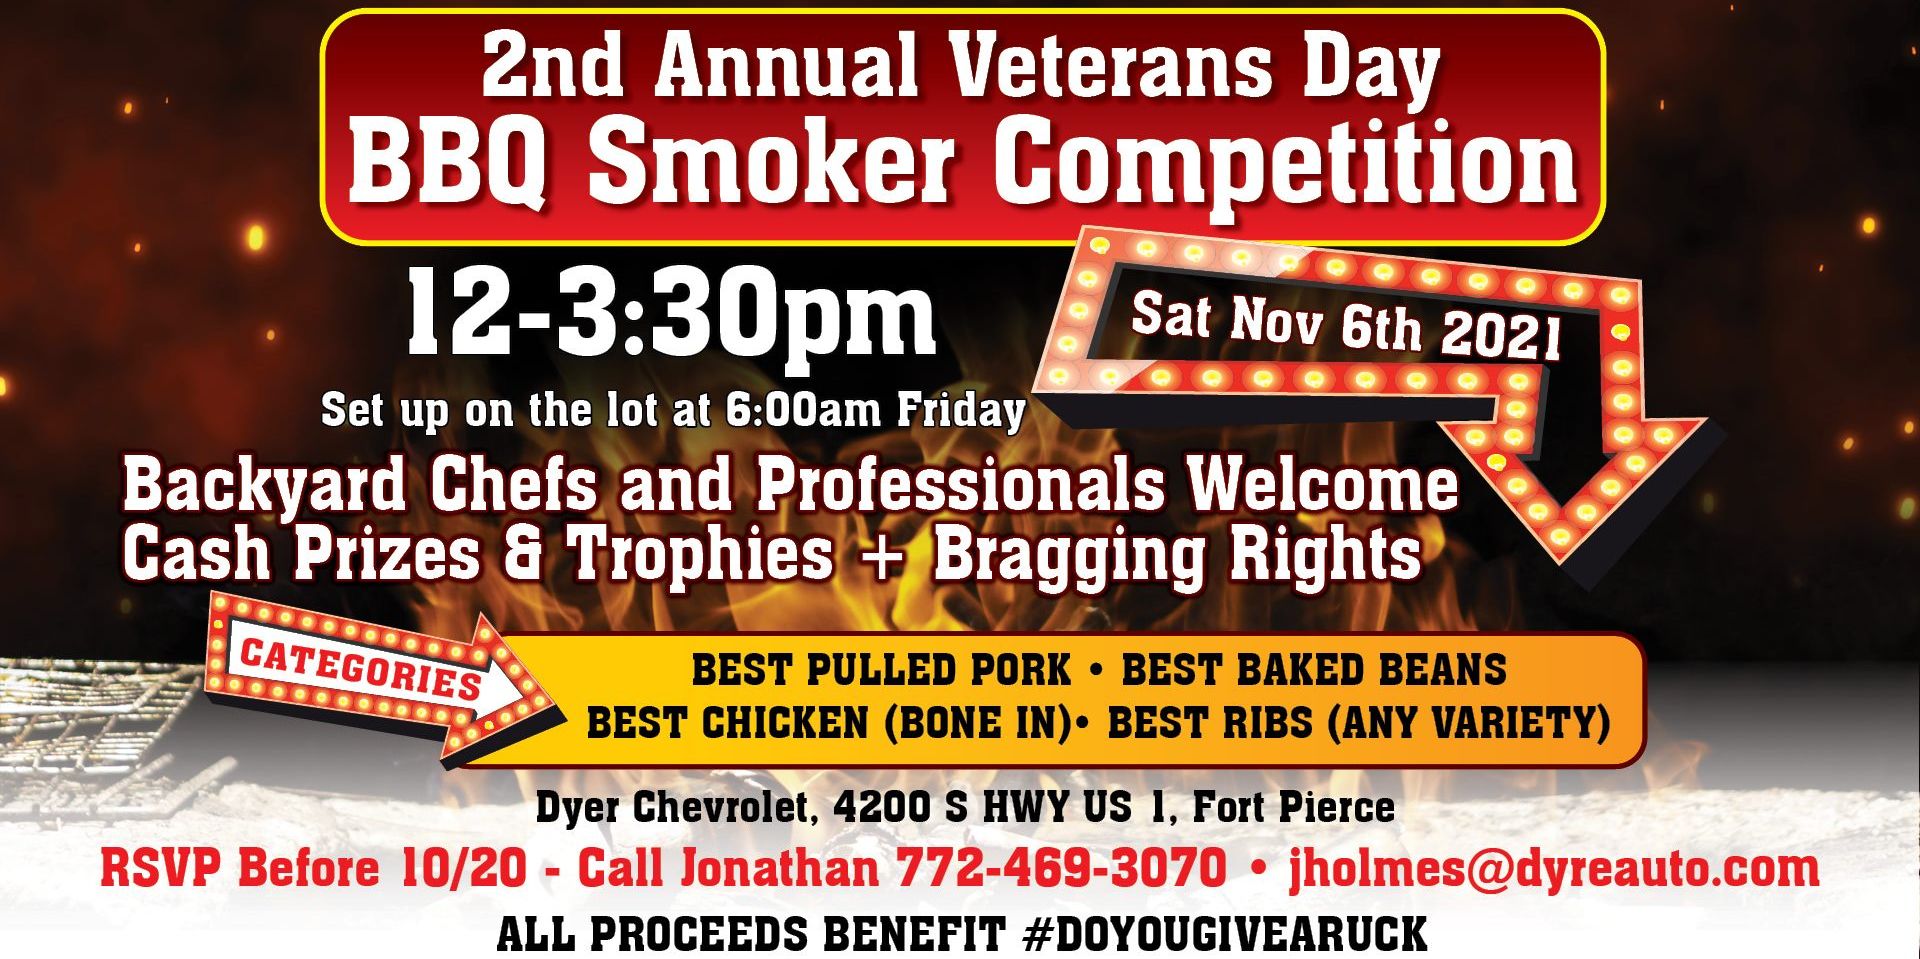 2nd Annual Veterans Day BBQ Smoker Competition promotional image